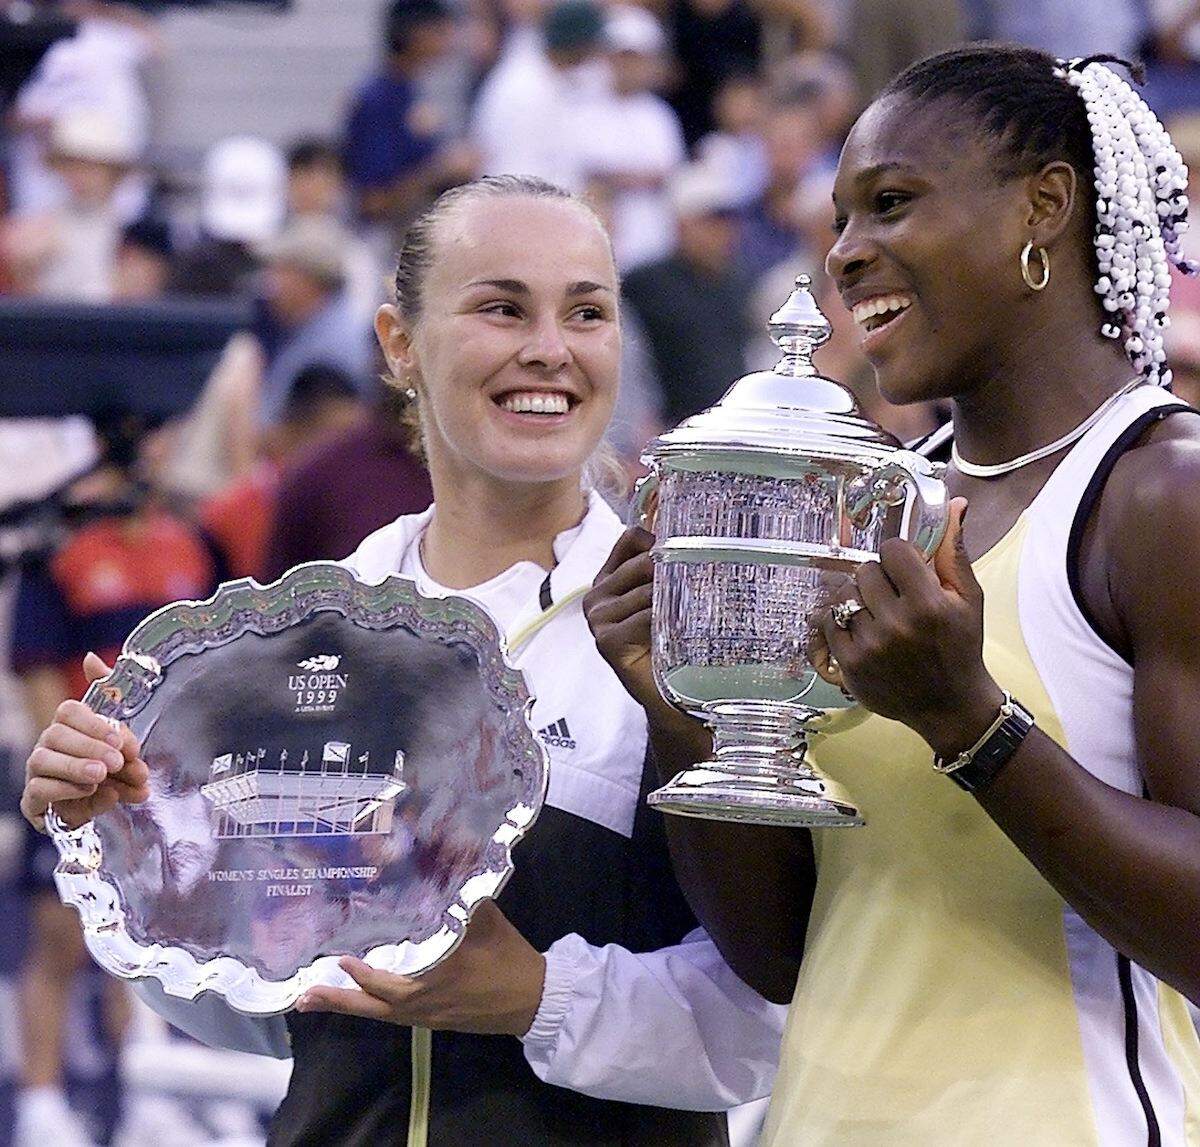 Serena Williams of the US holds the U.S. Open trophy after defeating Martina Hingis of Switzerland in 1999